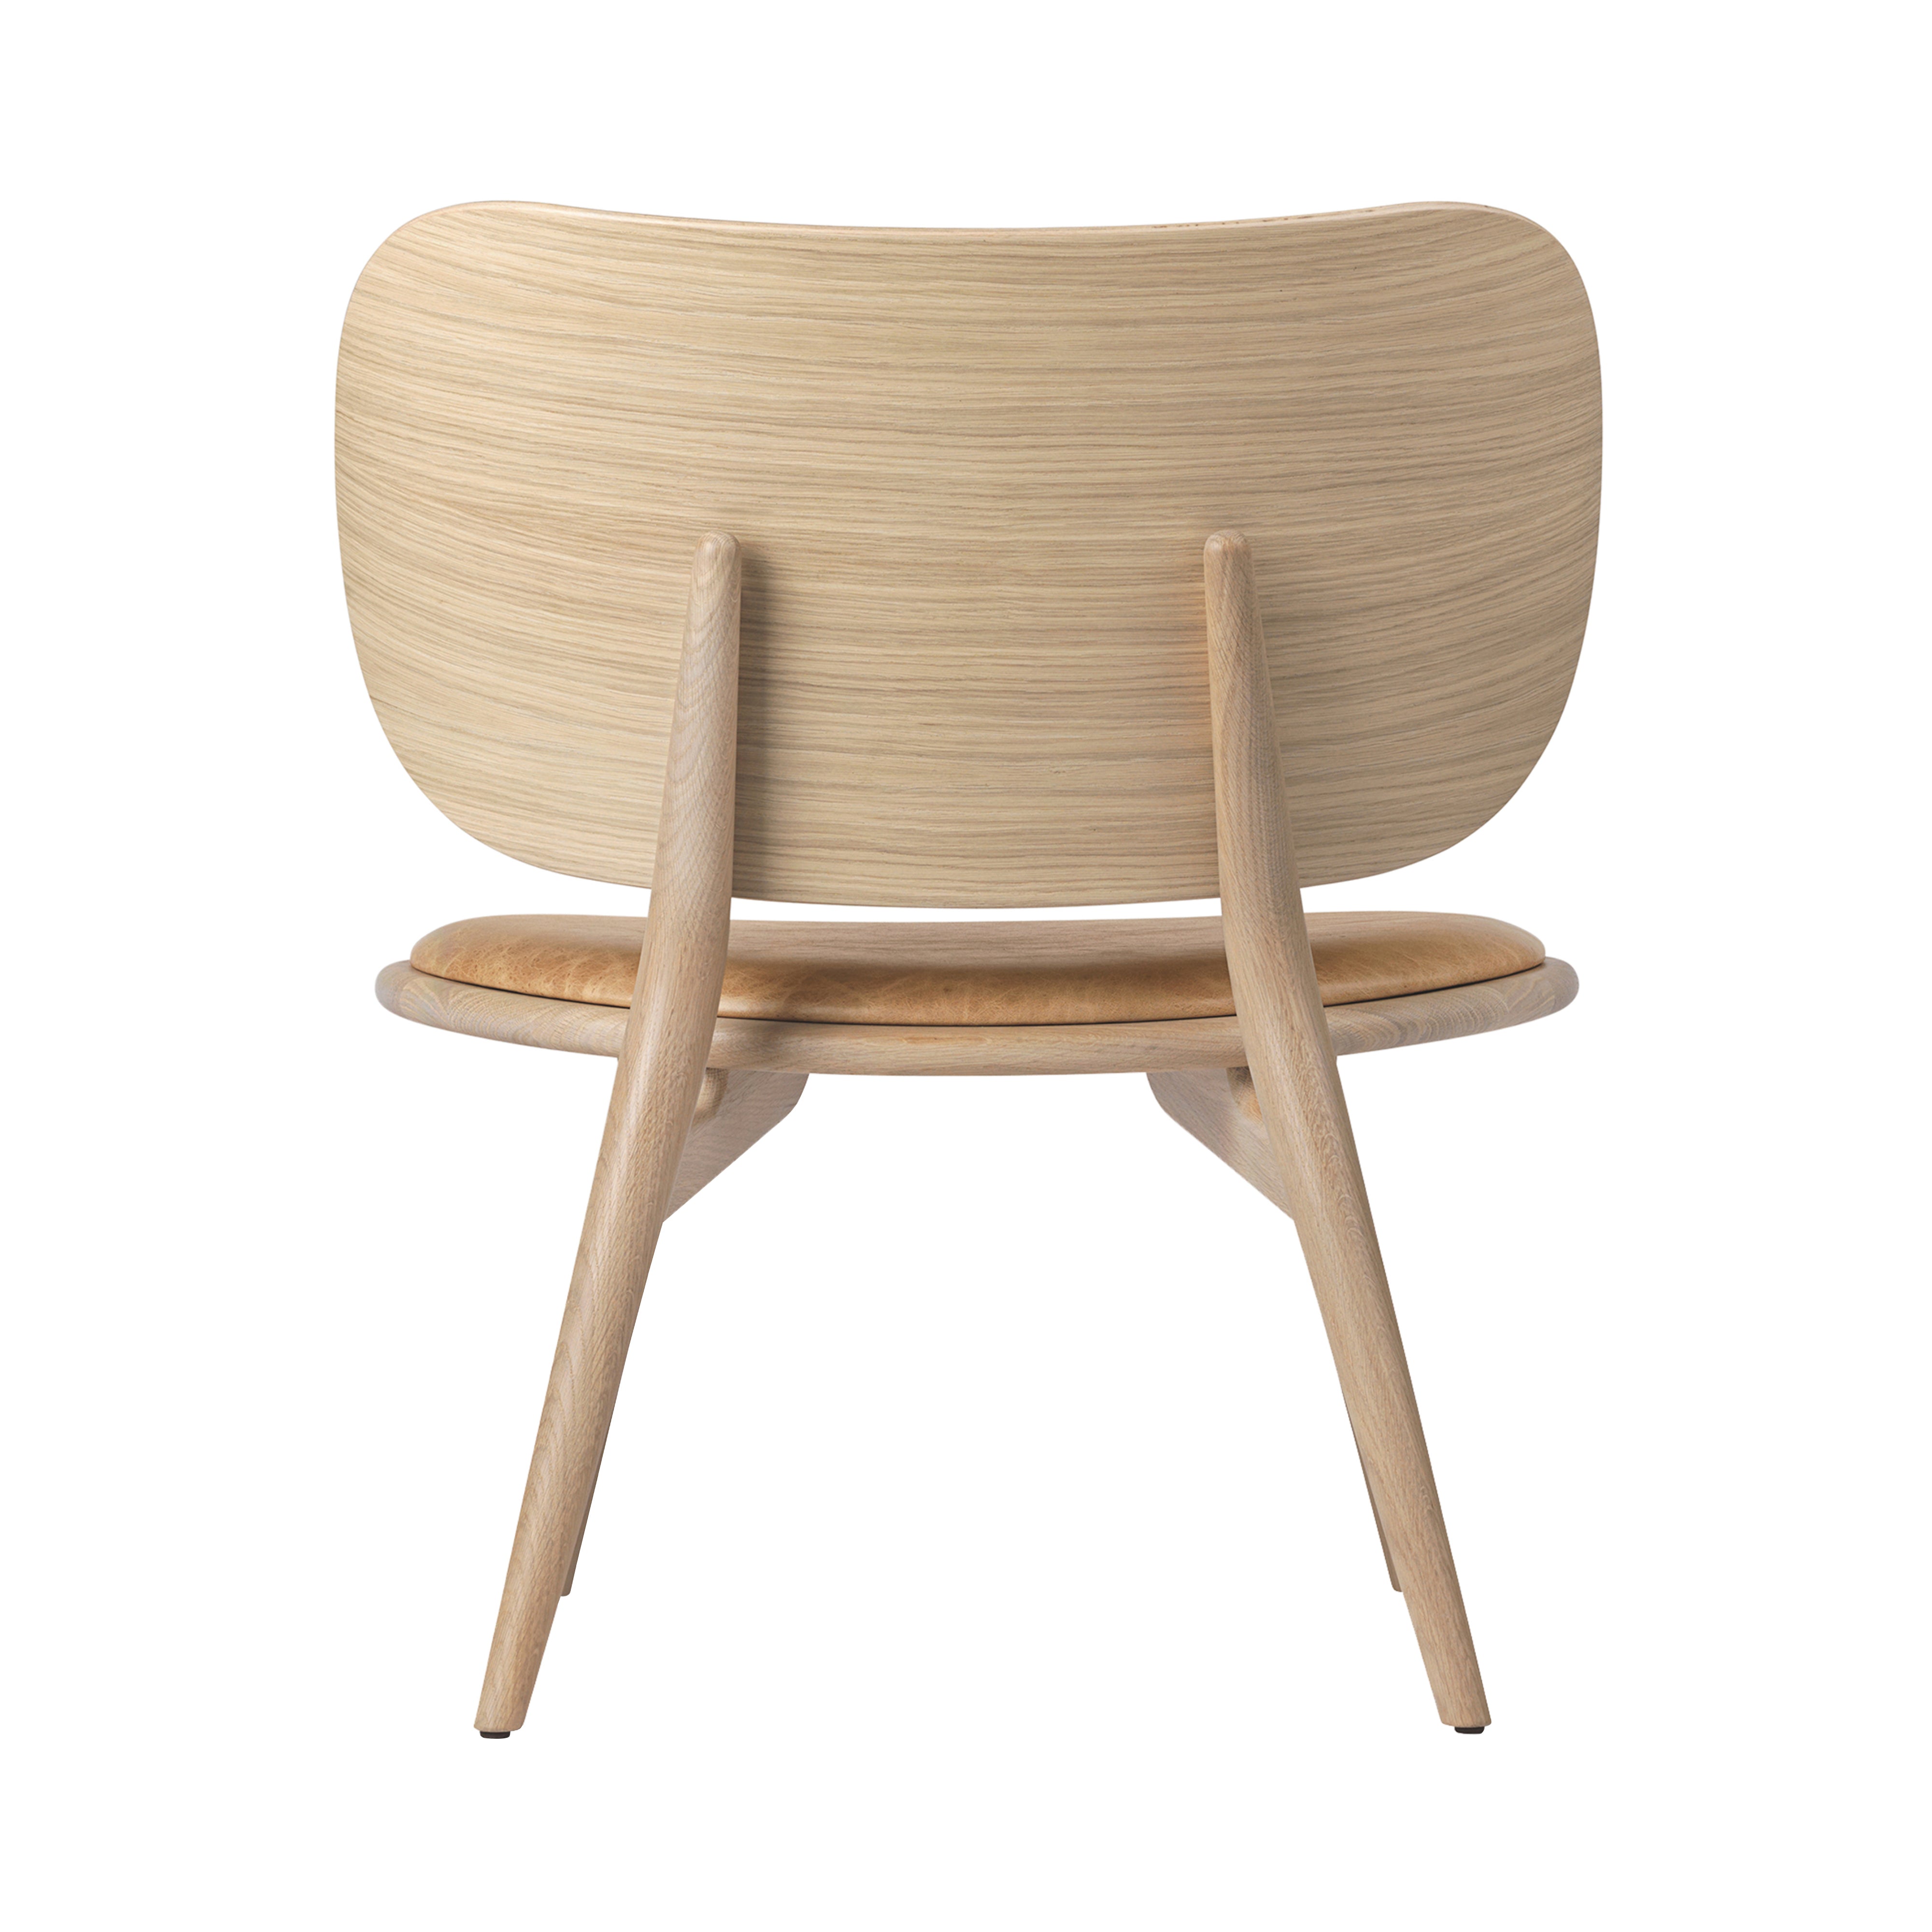 The Lounge Chair: Matt Lacquered Oak + Natural Tanned Leather